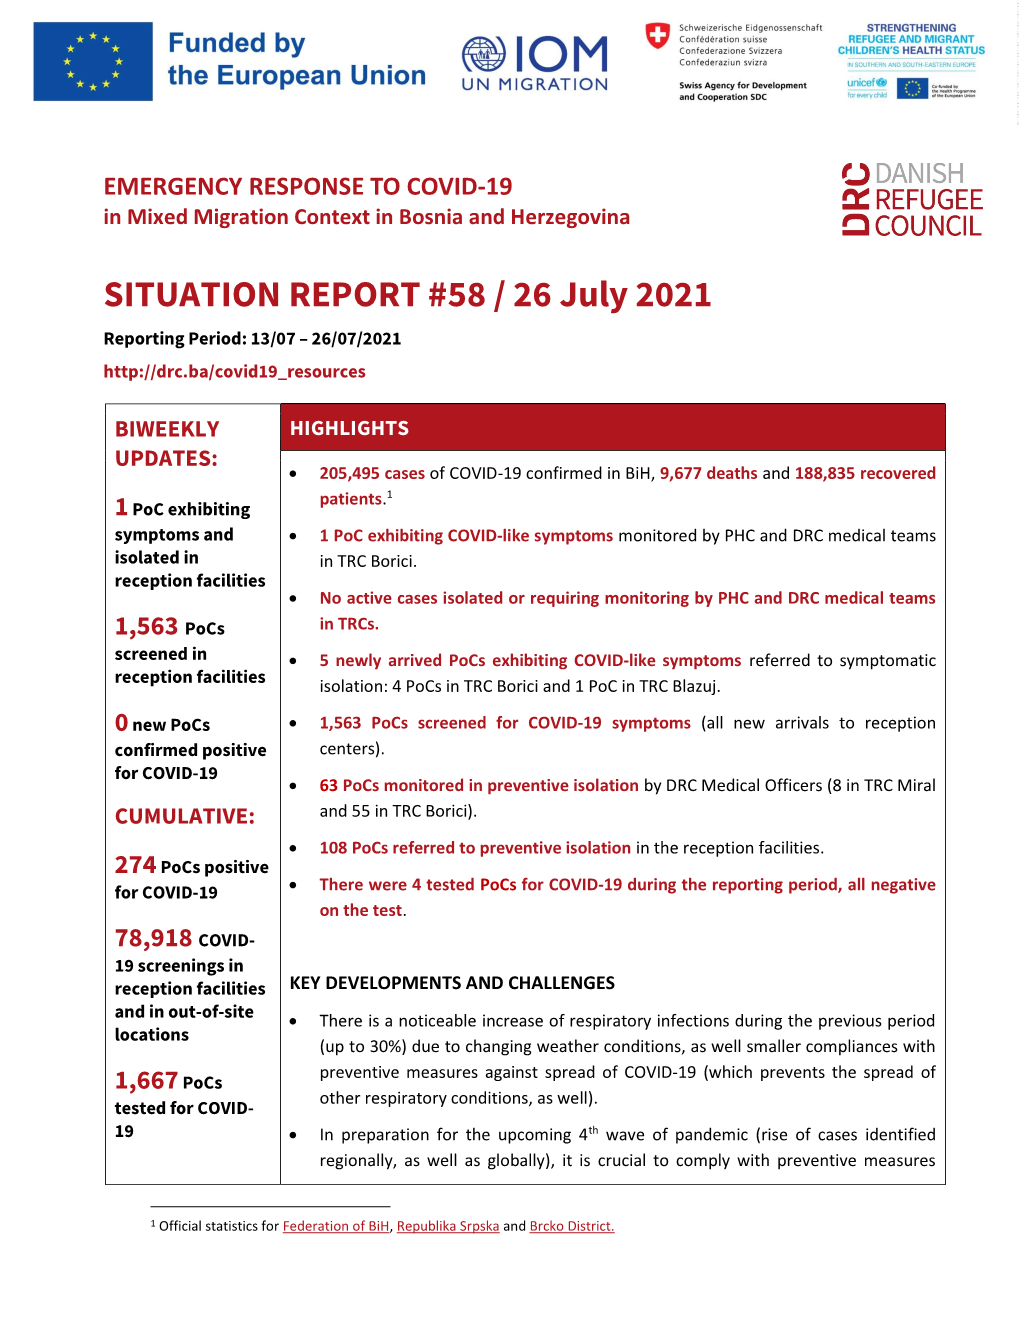 SITUATION REPORT #58 / 26 July 2021 Reporting Period: 13/07 – 26/07/2021